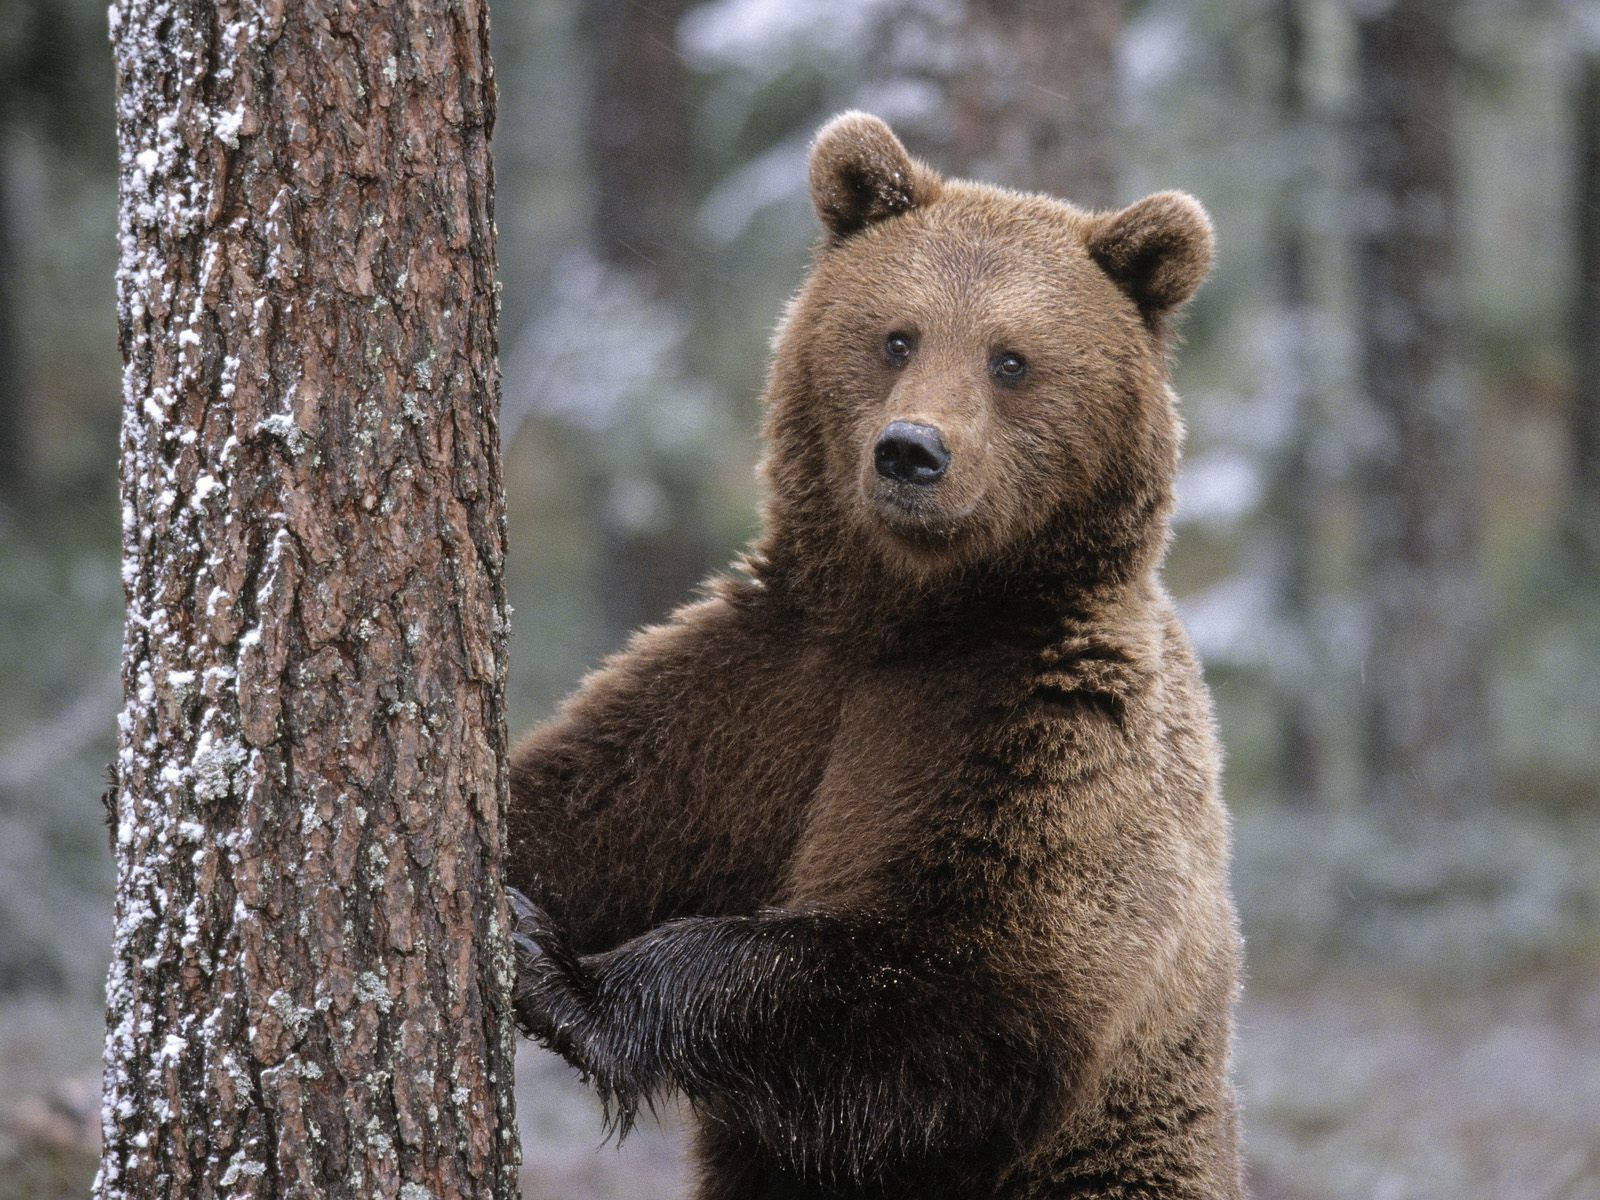 A Photograph Of A Brown Bear Blending Into Its Environment